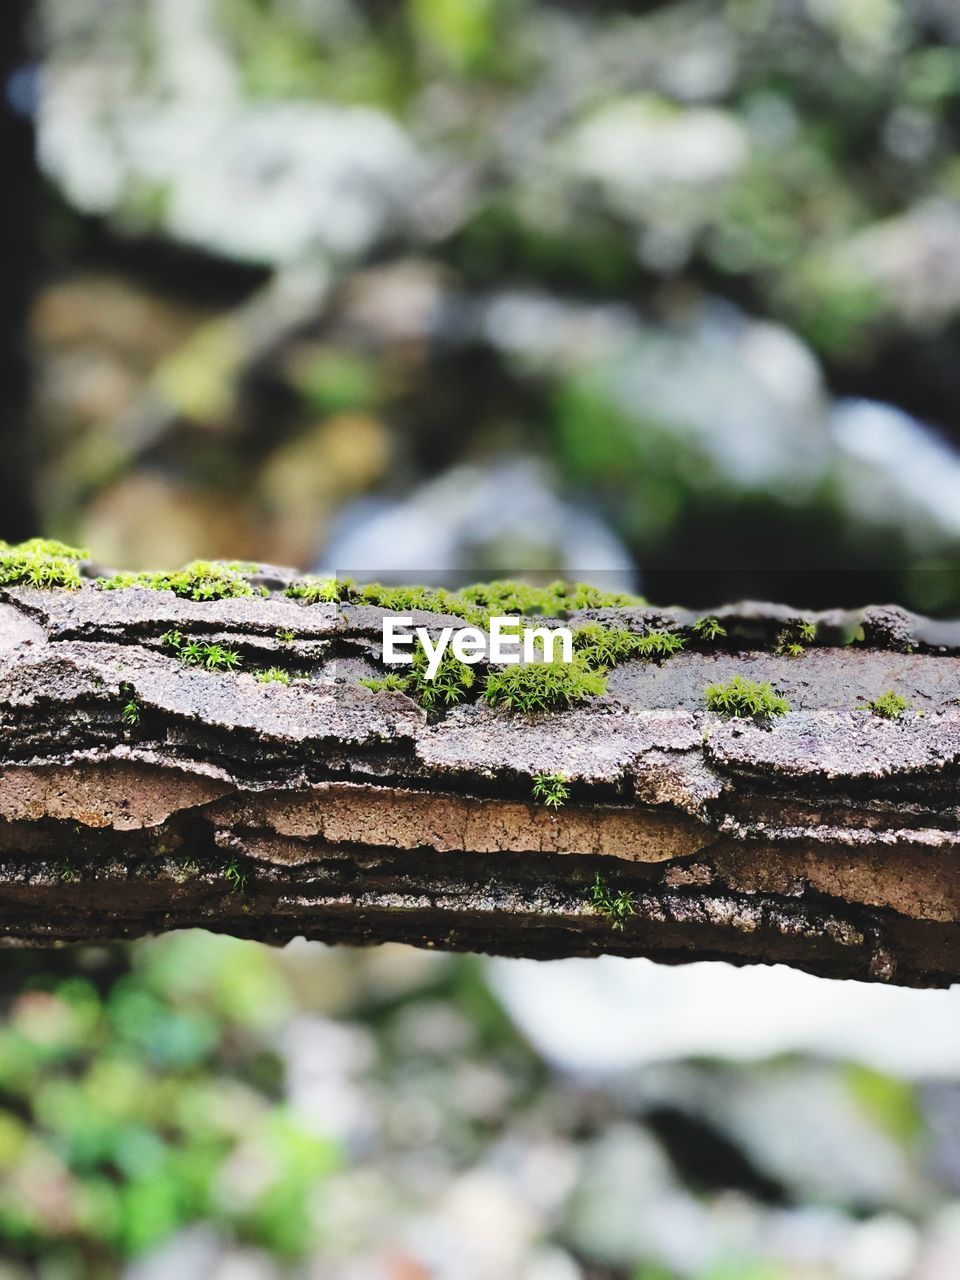 CLOSE-UP OF MOSS ON TREE BRANCH